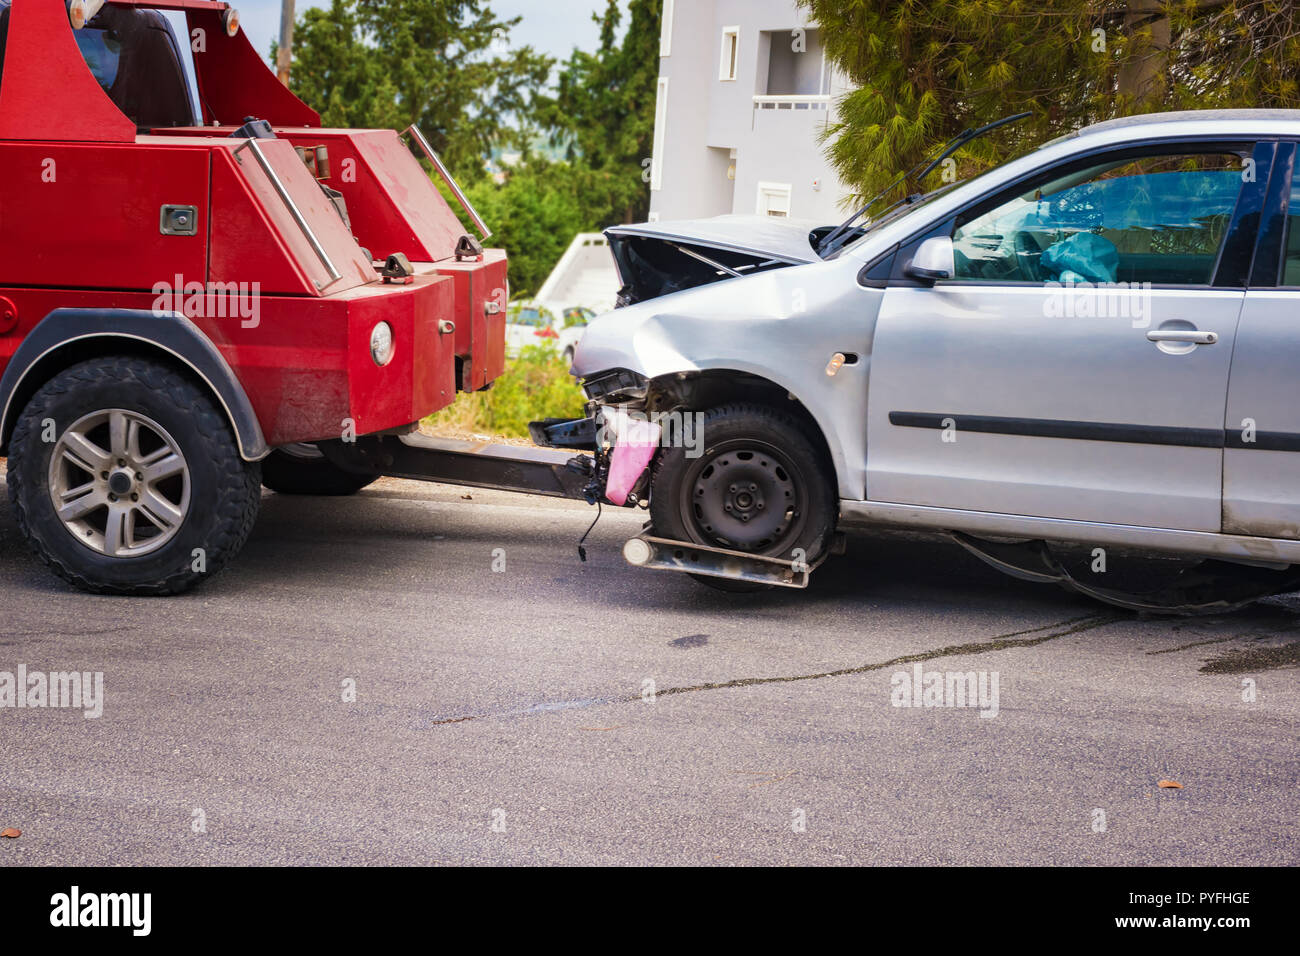 Crashed car after accident ready to be tow away by tow truck Stock Photo